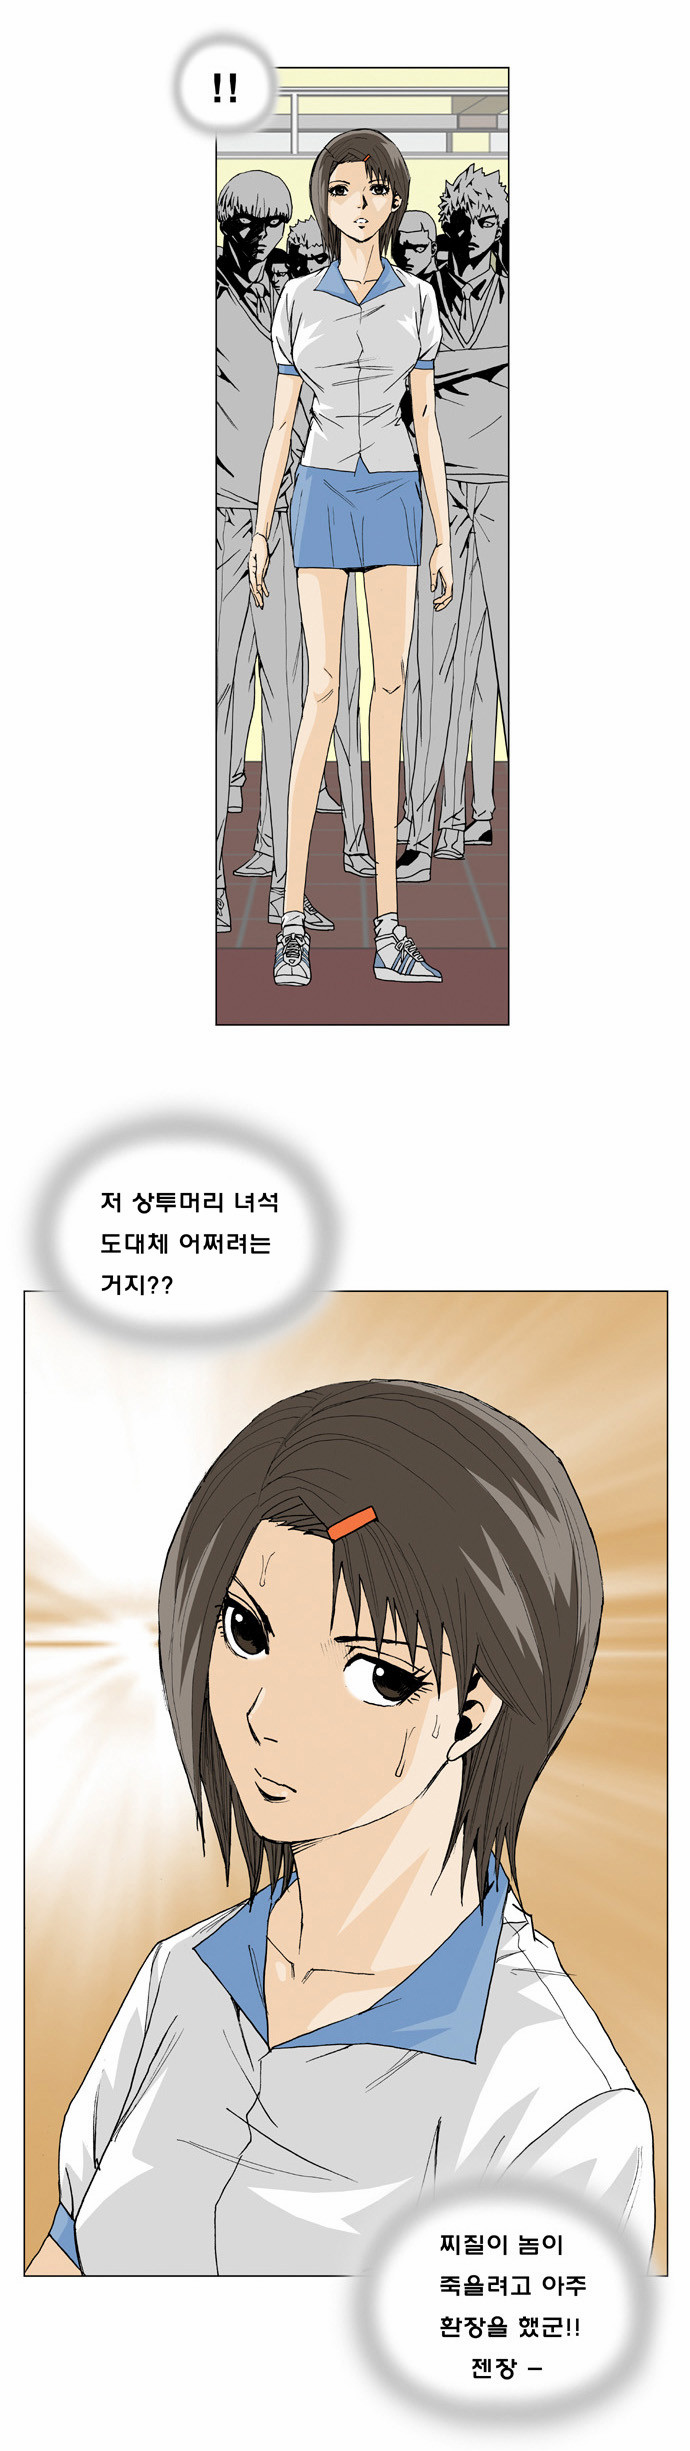 Ultimate Legend - Kang Hae Hyo - Chapter 4 - Page 28